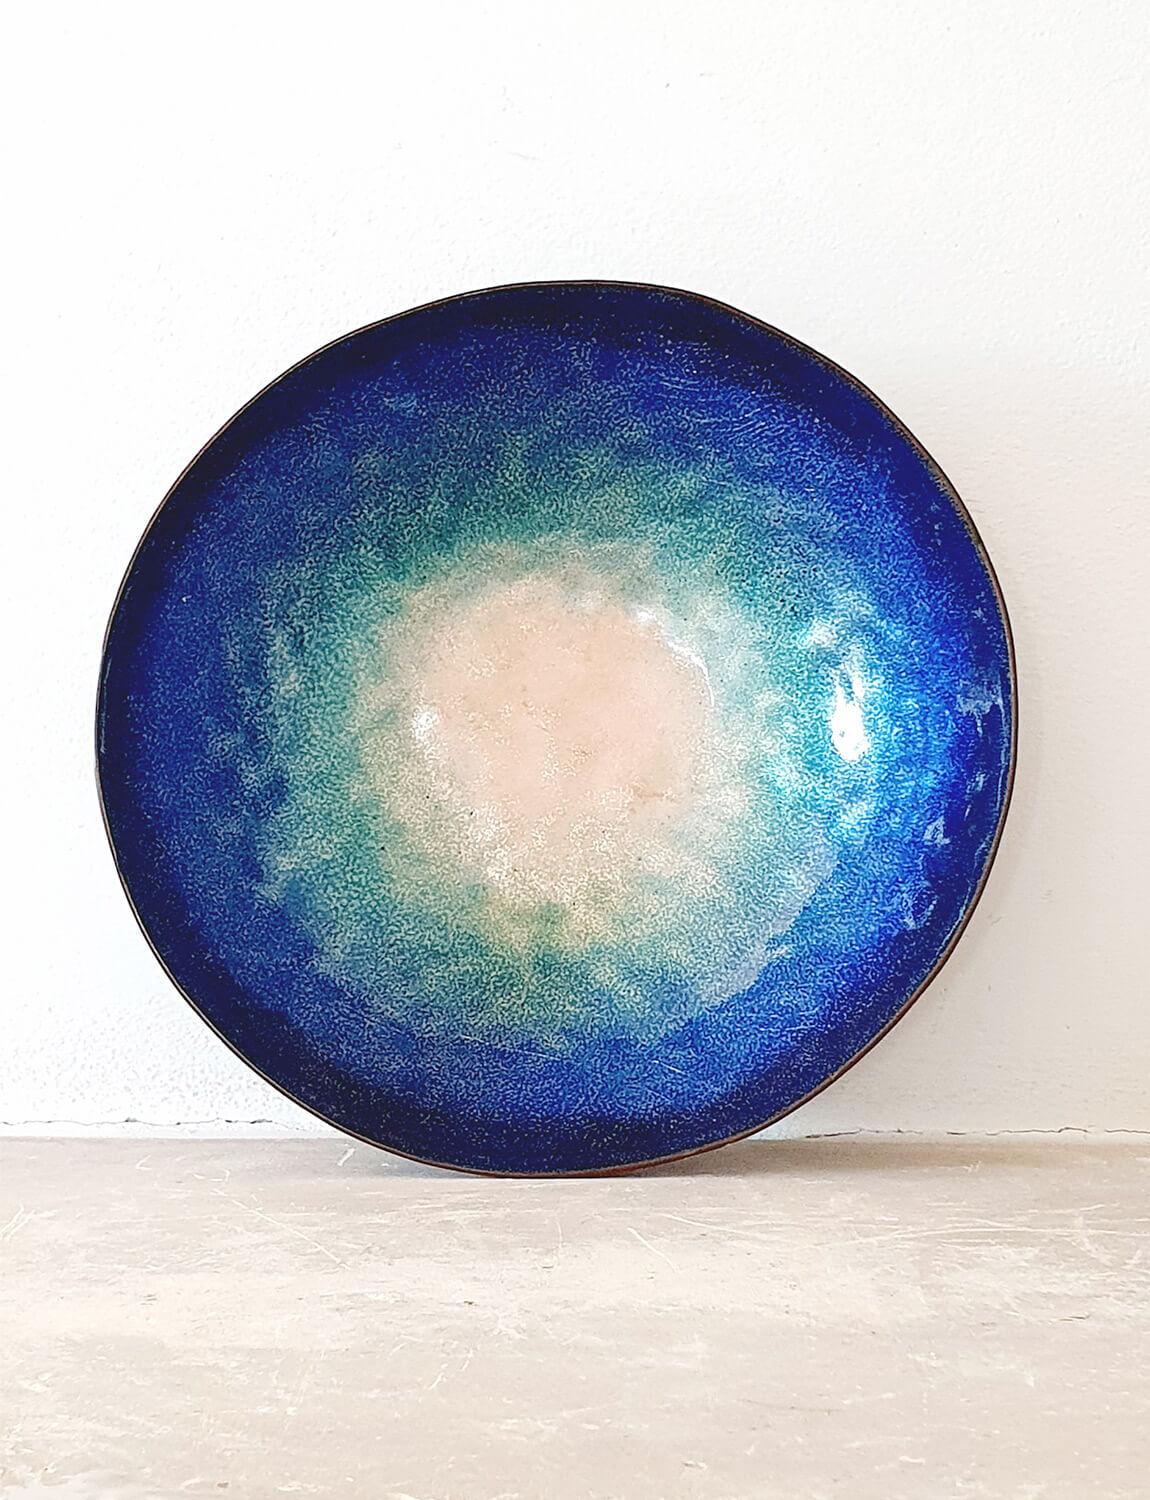 A particularly beautiful example of a Paolo de Poli bowl. Paolo di Poli, the Italian artist, was born in 1905 and died in 1996. This bowl is signed Paolo di Poli on the base and is made of copper with an exceptional blue and turquoise enamelled